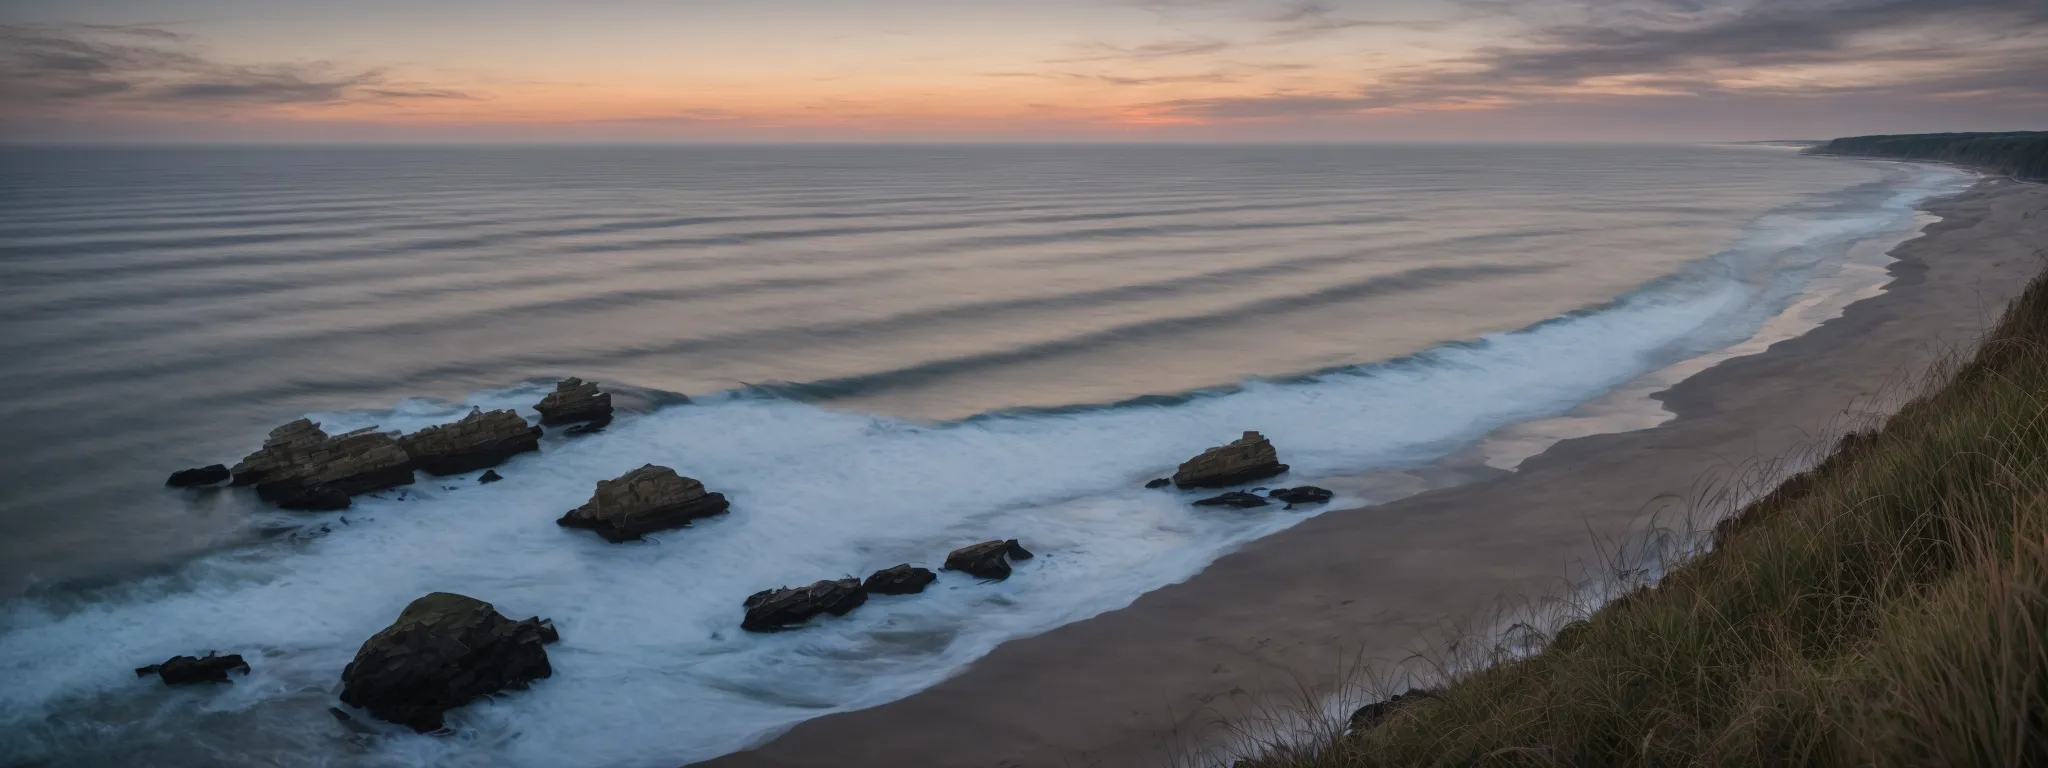 a scenic delaware coastline at sunrise, highlighting the region's natural beauty.